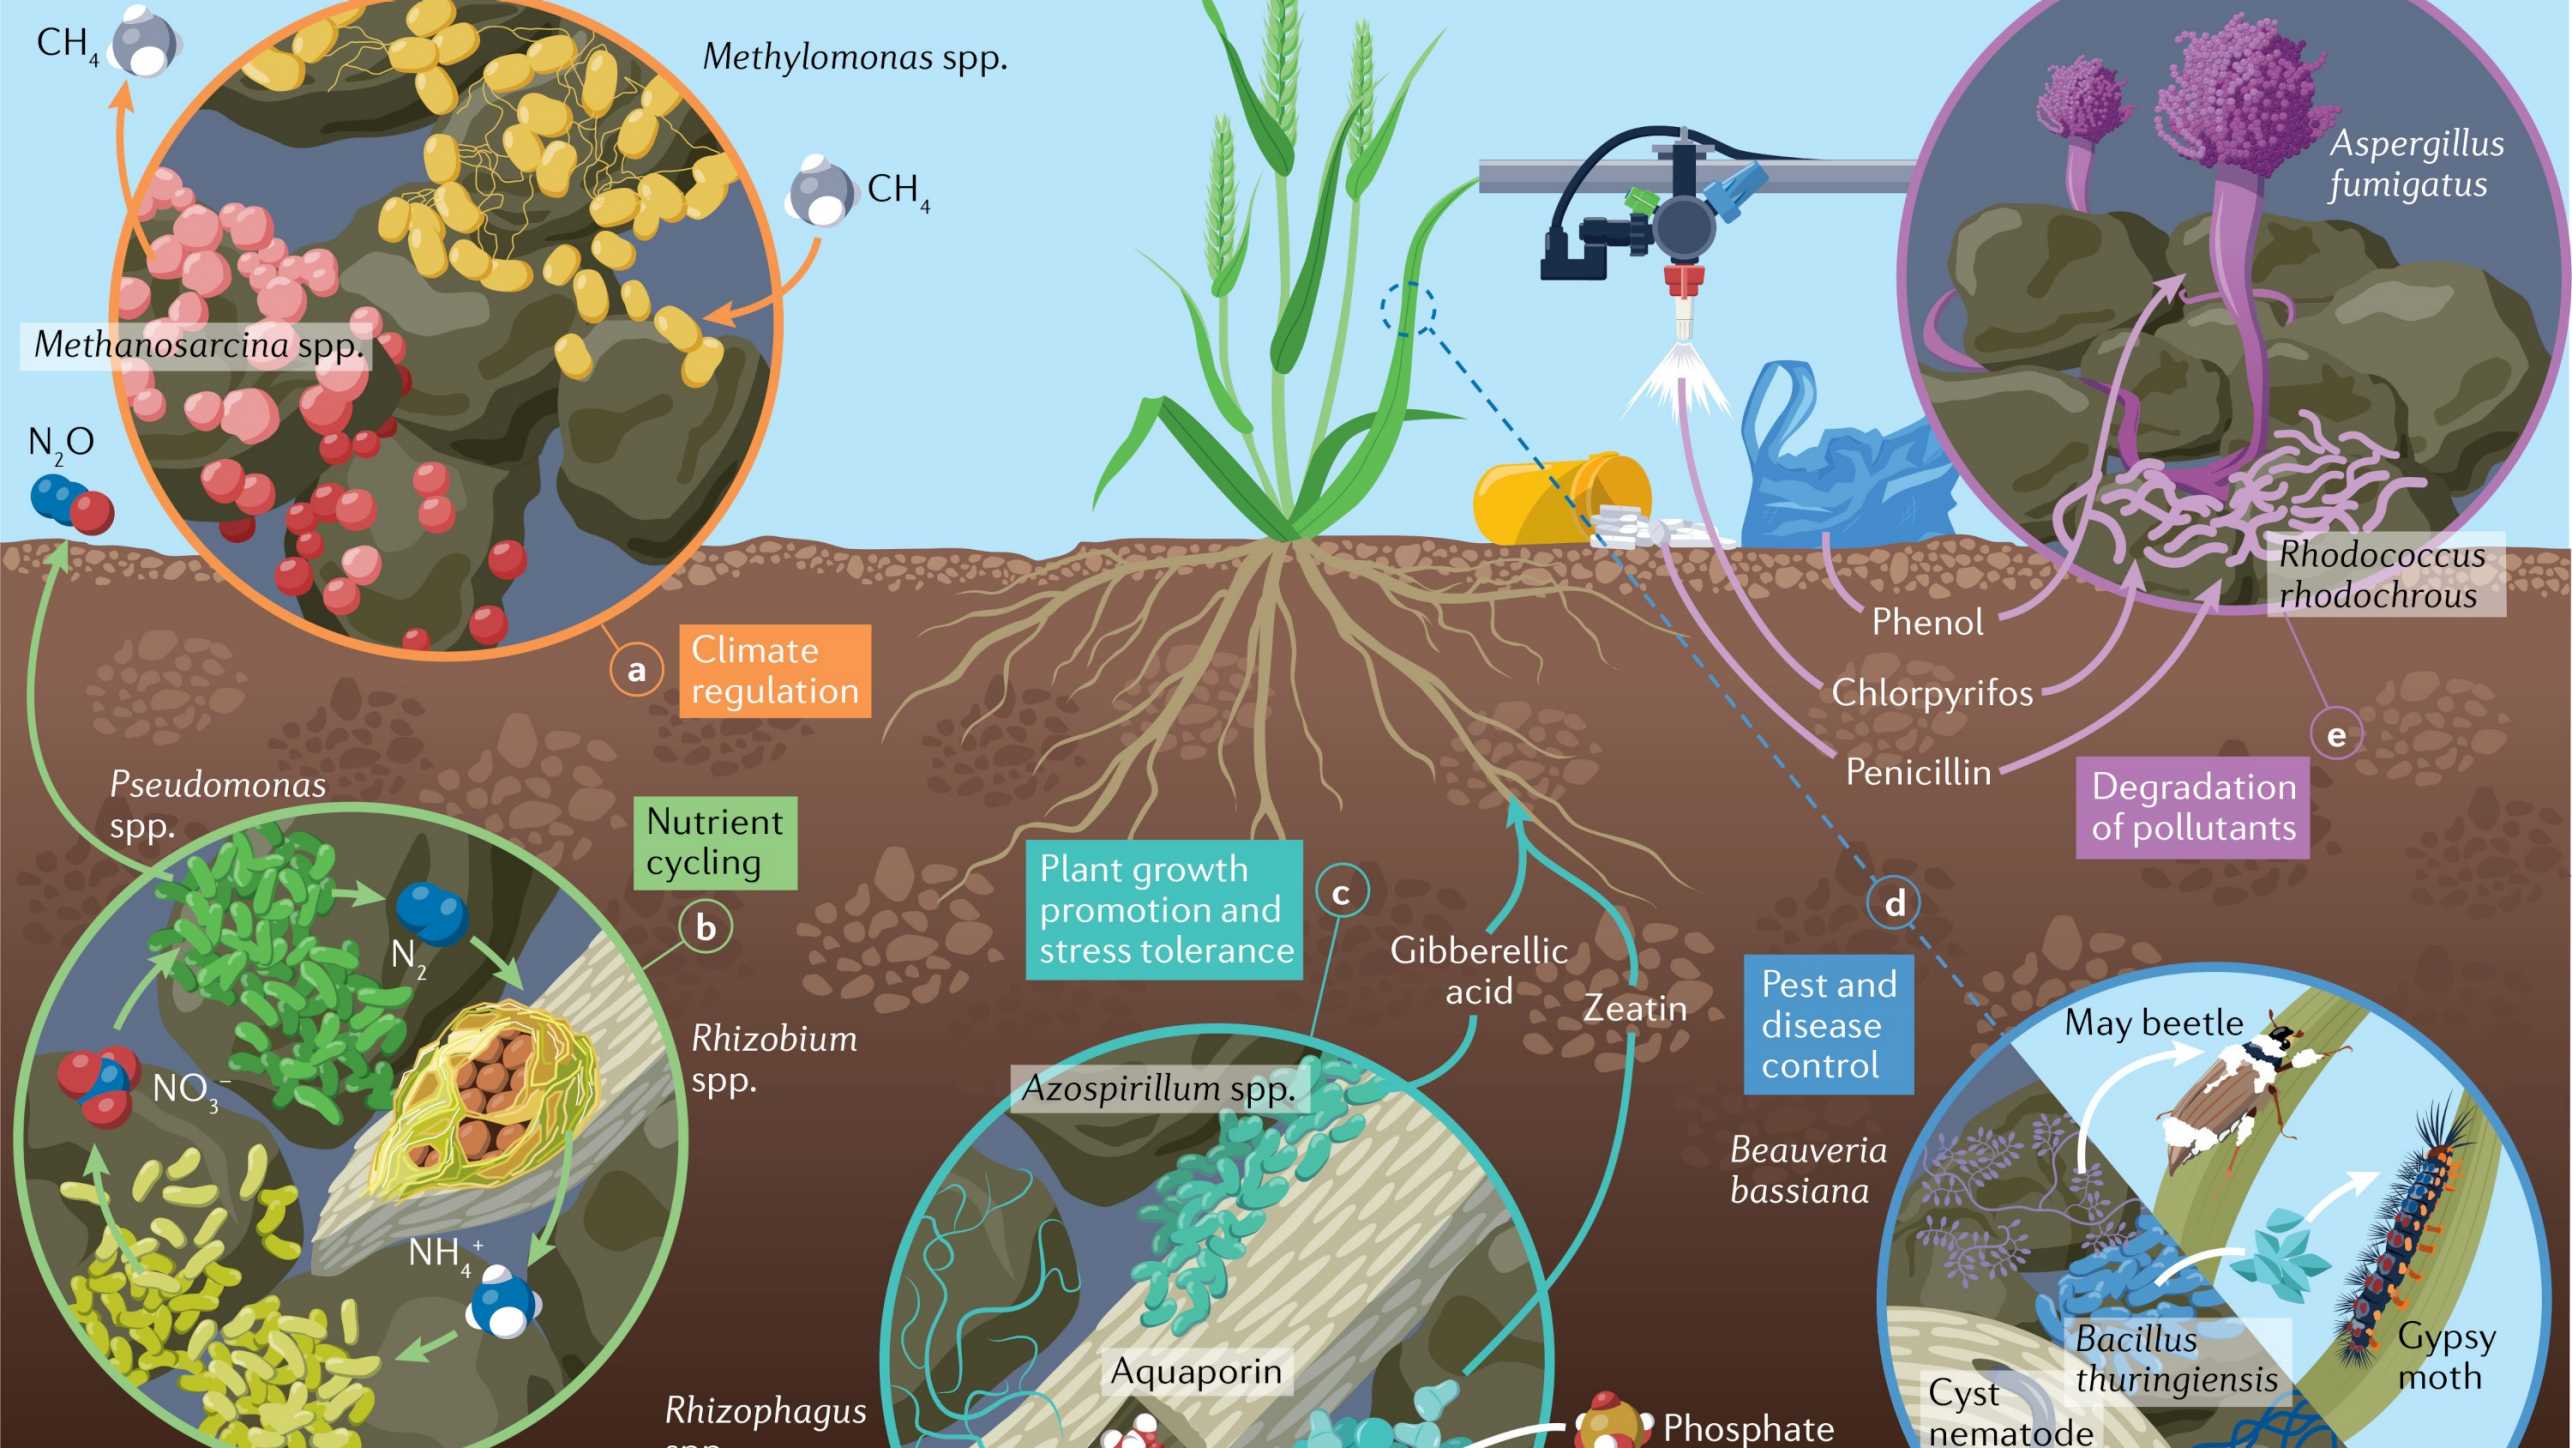 Illustration: Soil microorganisms play essential roles in crop production systems: a) climate regulation, b) nutrient cycling,